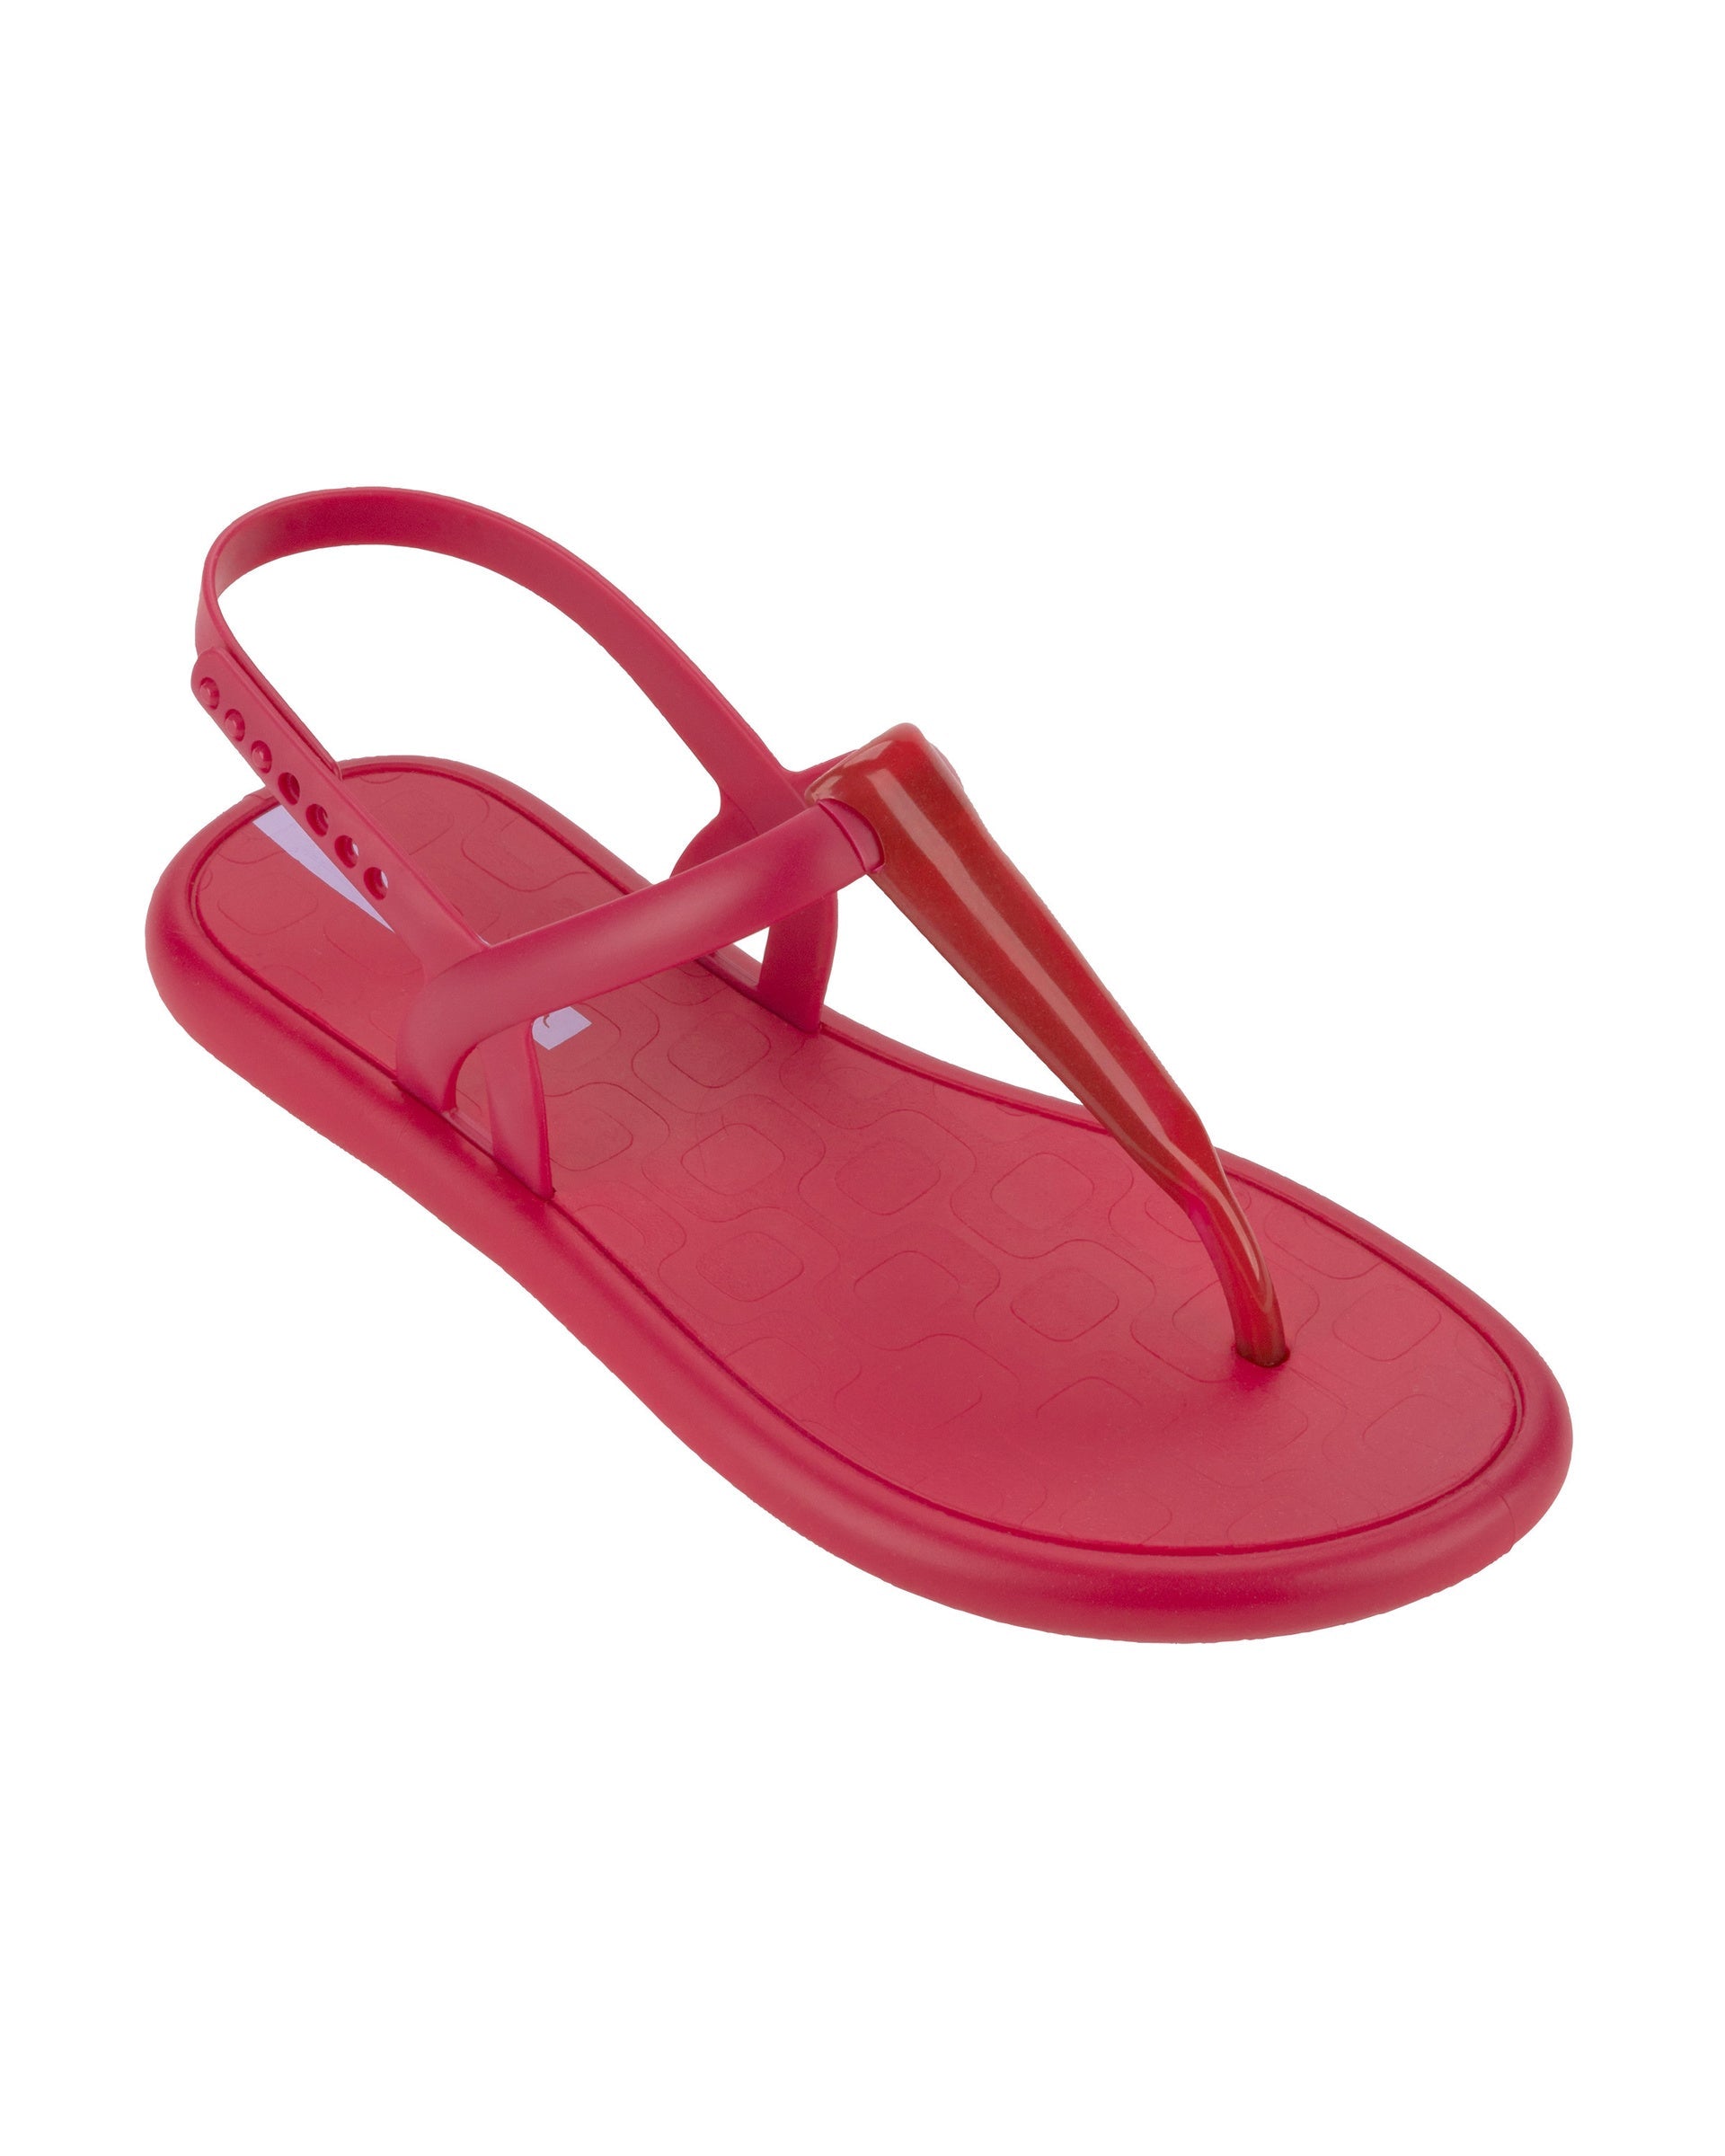 Angled view of a red Ipanema Glossy women's t-strap sandal.